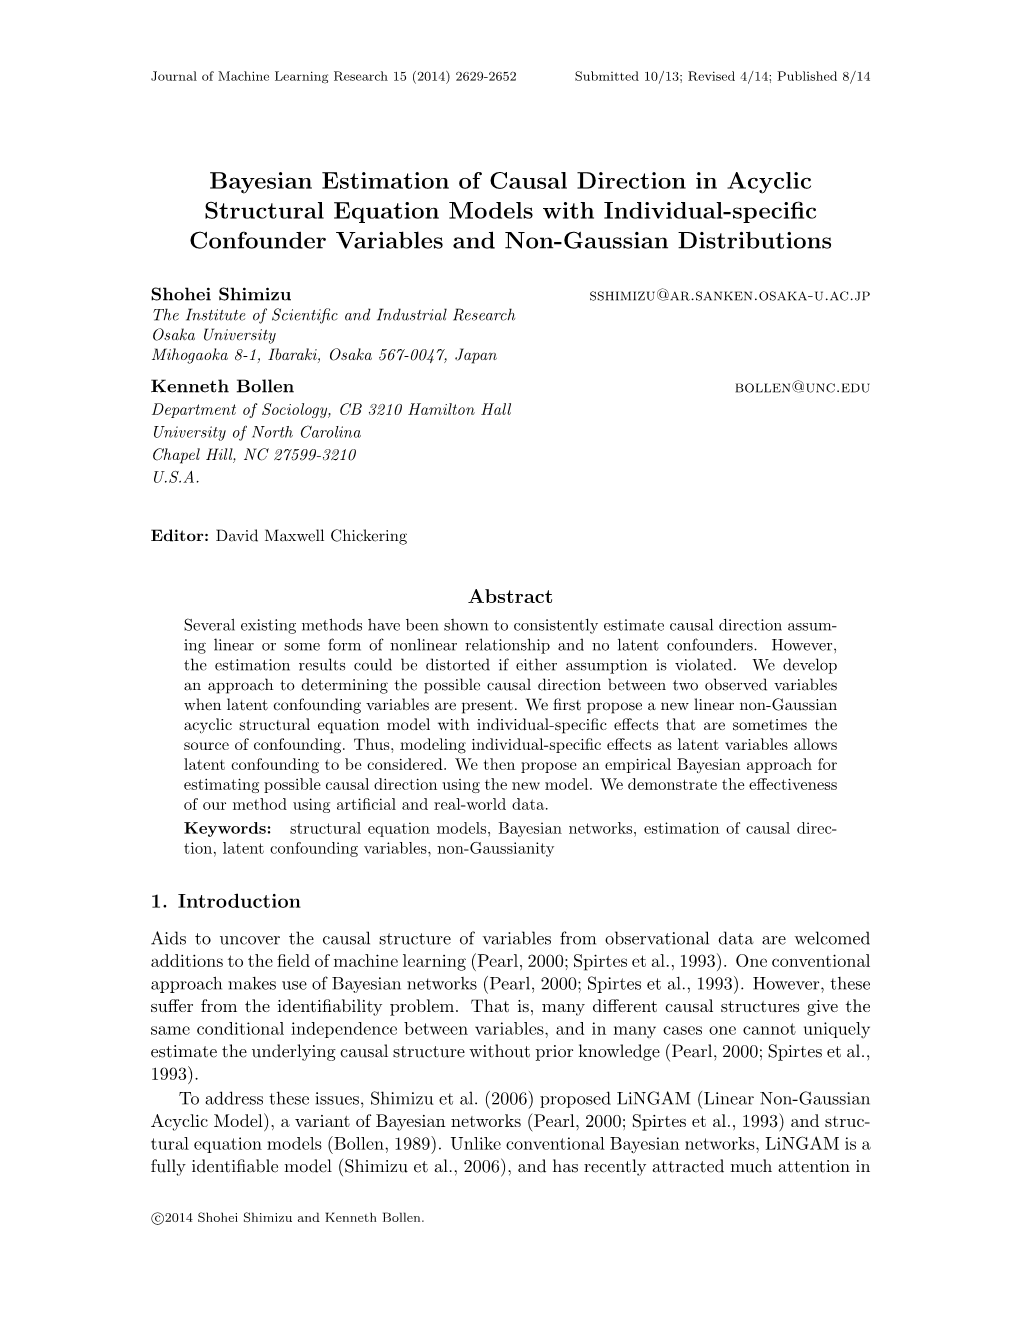 Bayesian Estimation of Causal Direction in Acyclic Structural Equation Models with Individual-Specific Confounder Variables